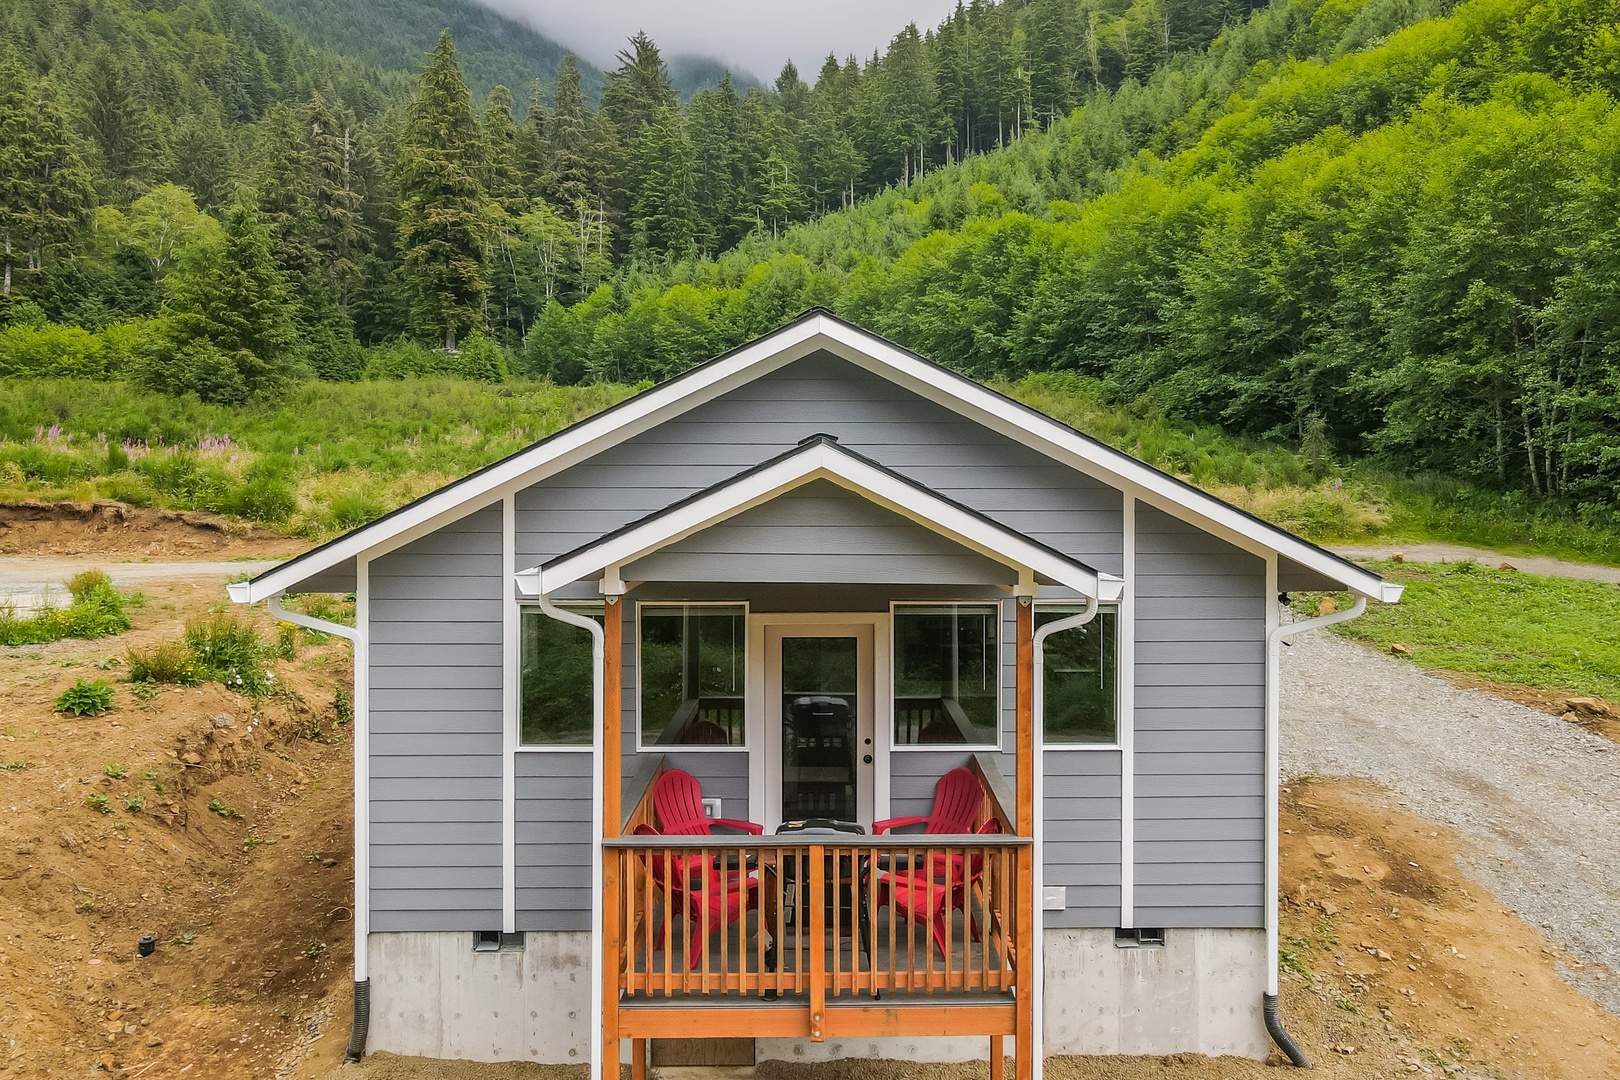 Nehalem Vacation Rentals, Nehalem Coastal Oasis - Welcome to the Nehalem Coastal Oasis, a newly built 3-bedroom, 3-bathroom home (including a main house and a garage apartment) nestled along the private and quiet backroads of the spectacular Oregon coast